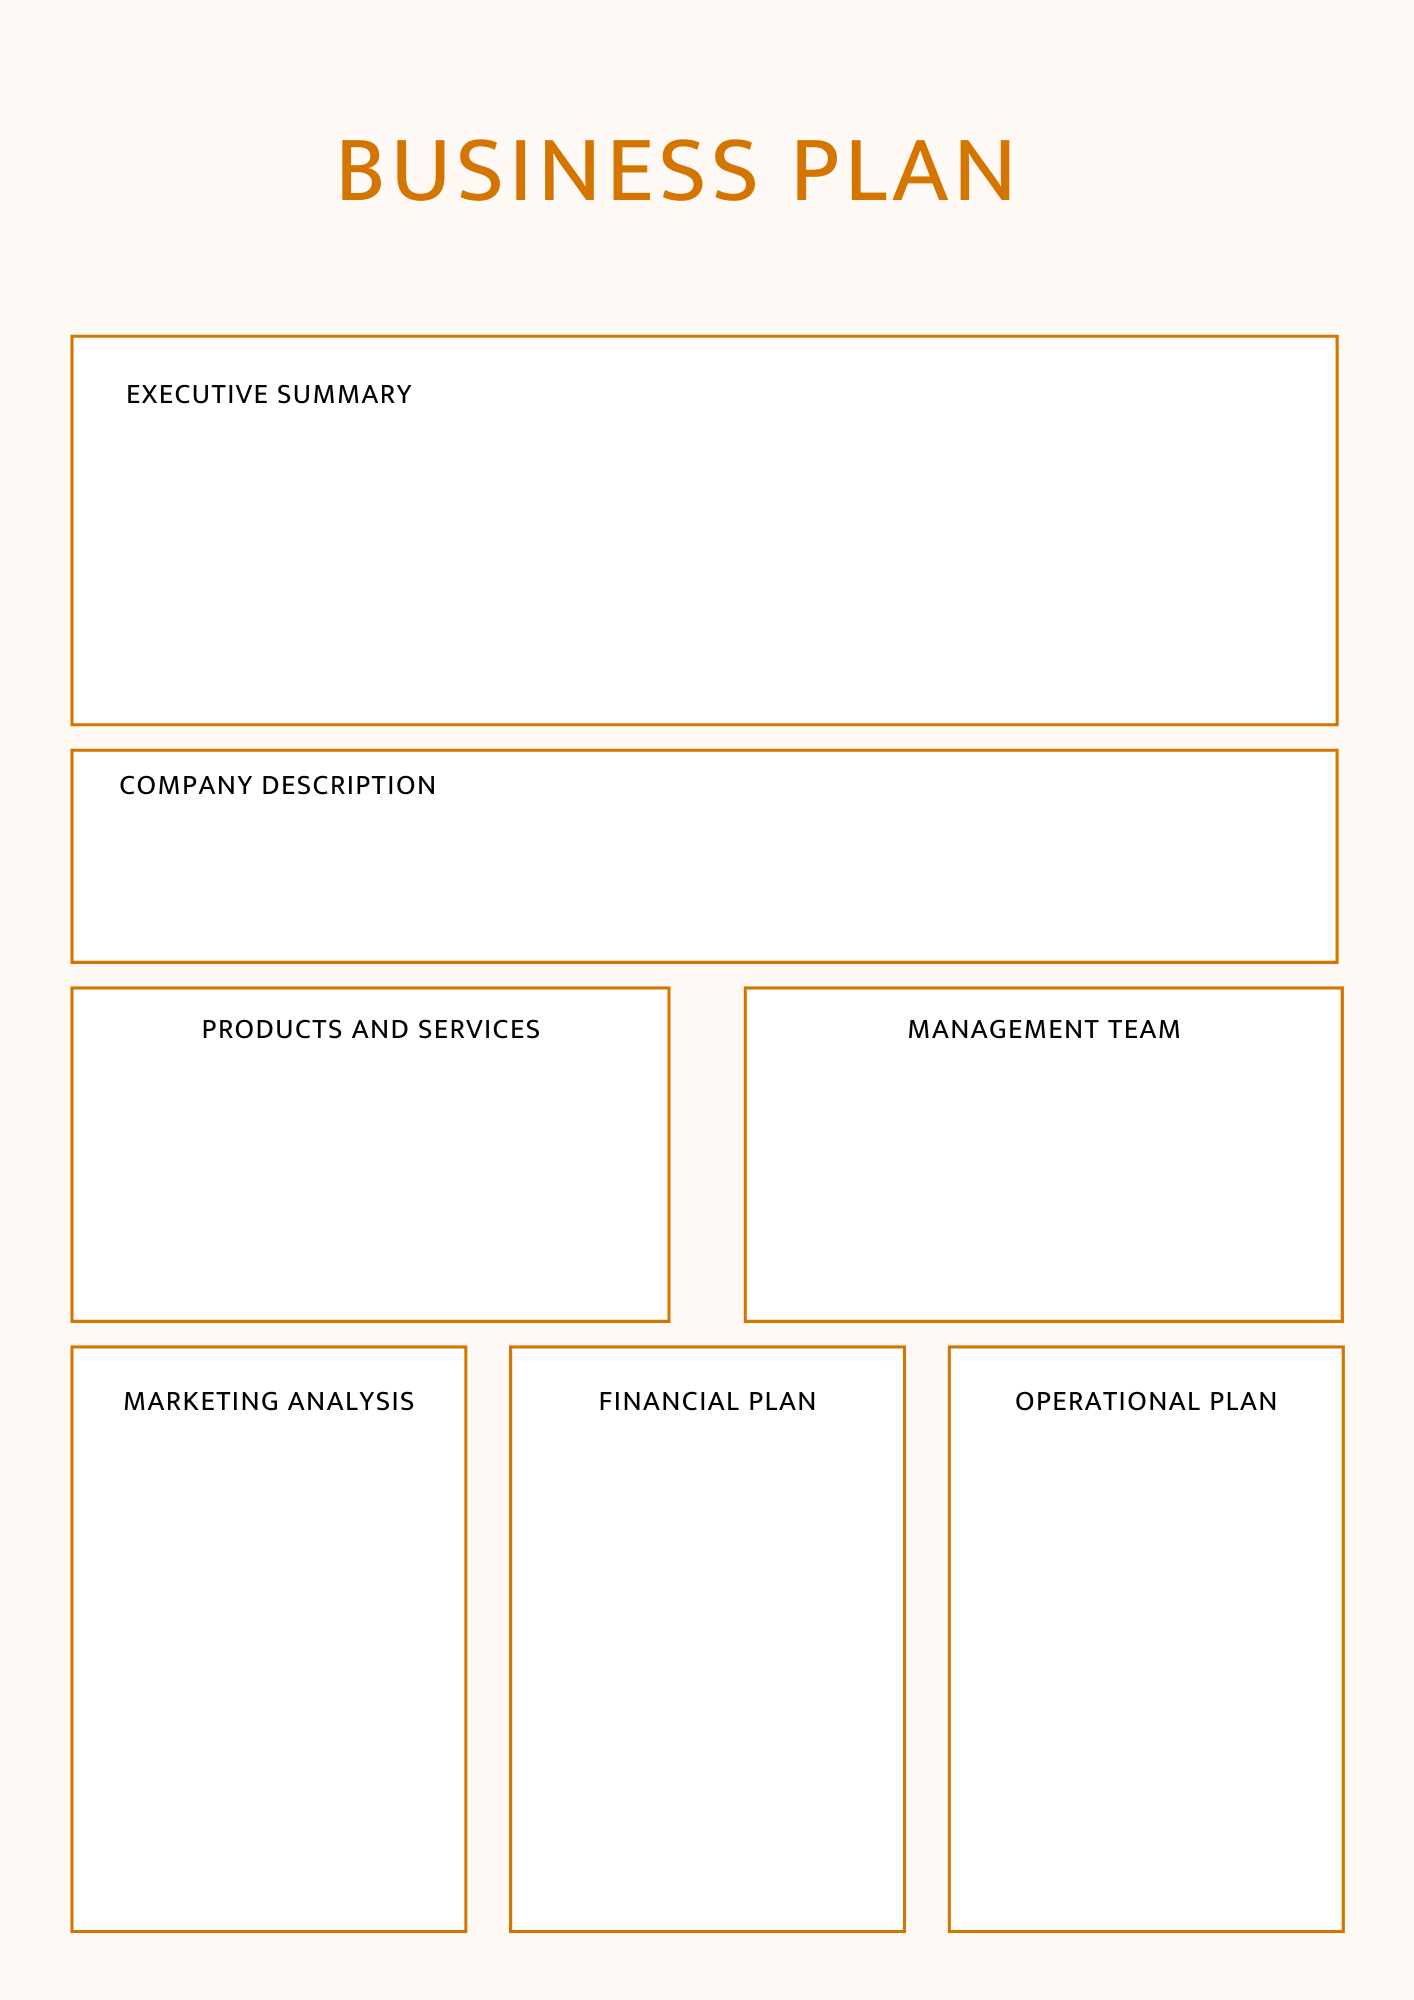 Business Plan Template: Create the Foundation for Your Business With One Page 2